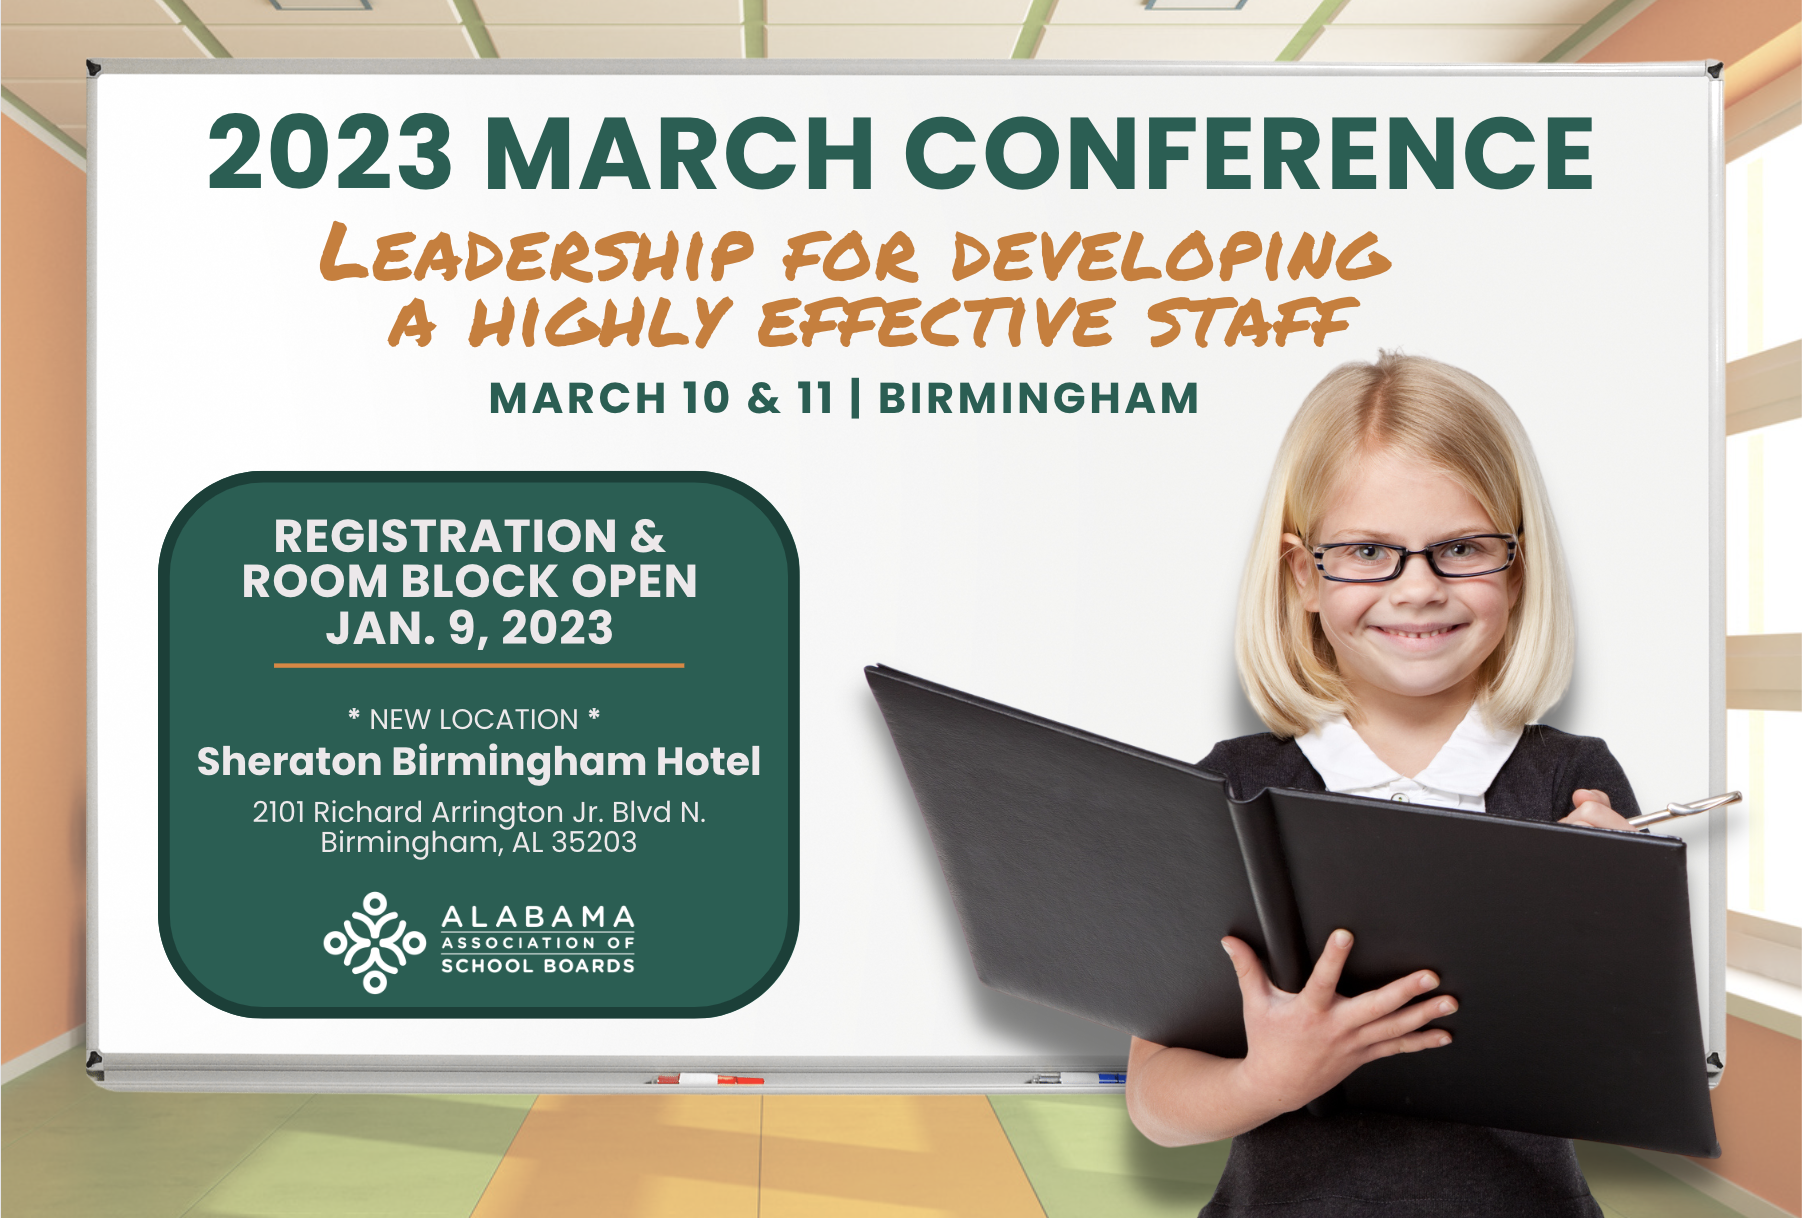 2023 March Conference: Leadership for Developing a Highly Effective Staff